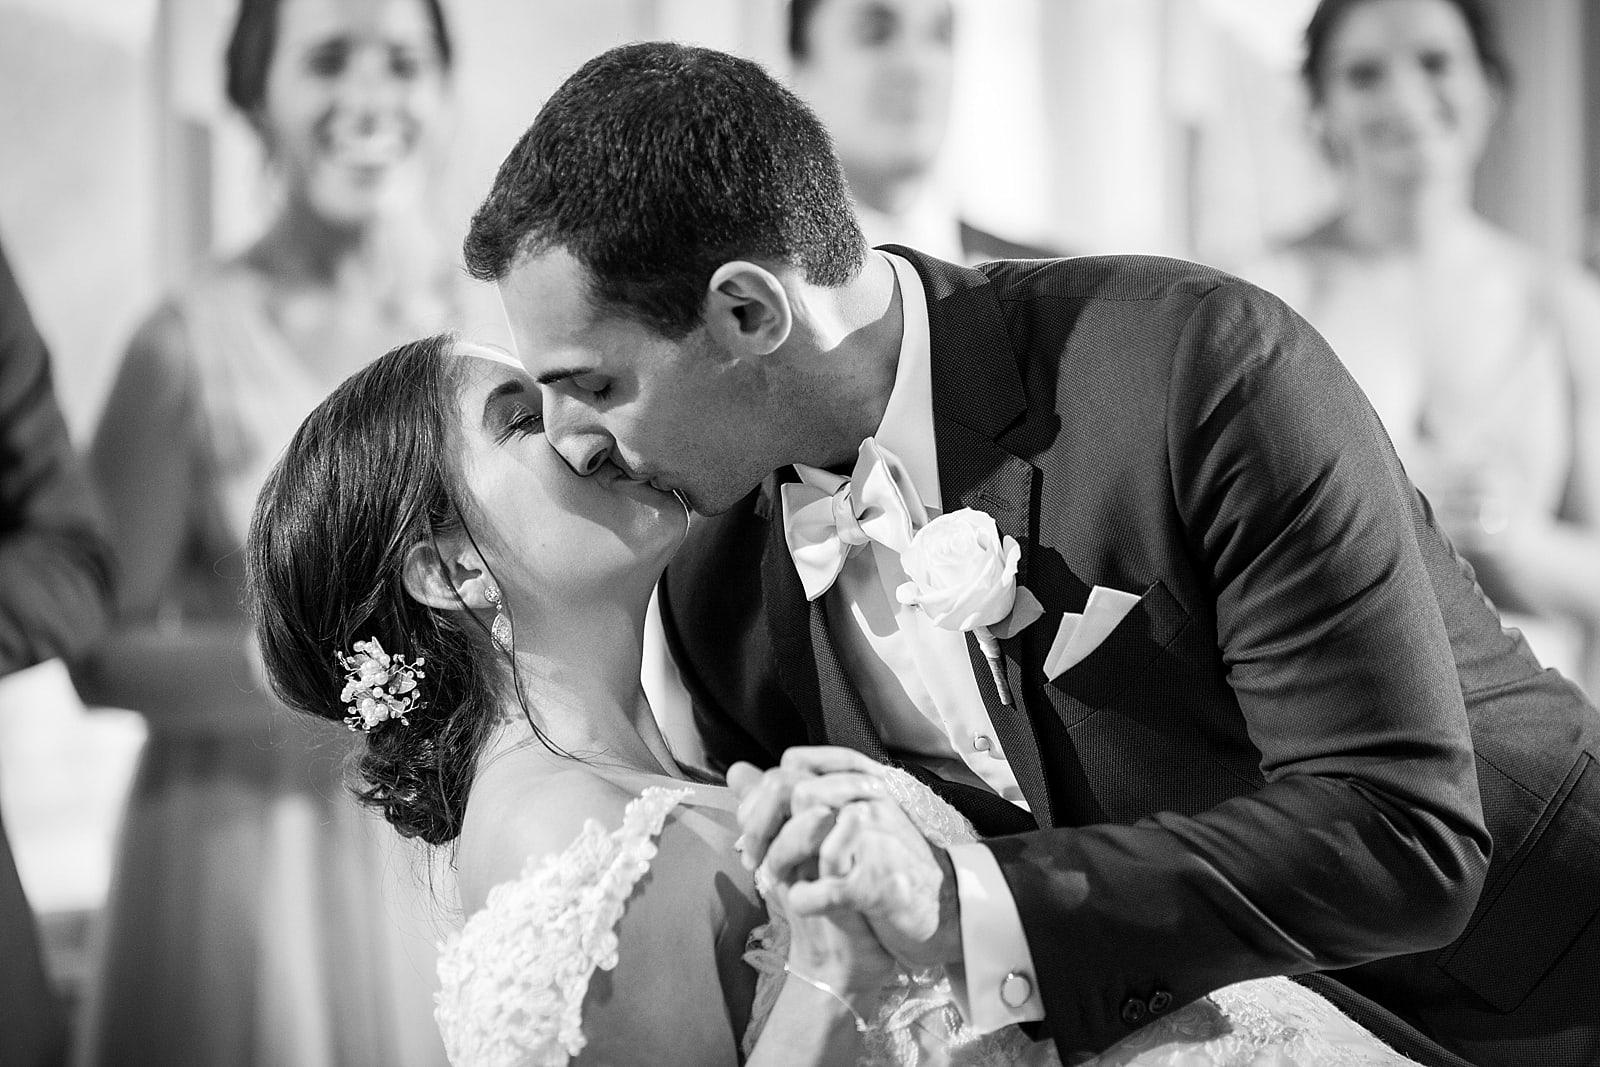 First dance, dip, kiss, black and white, husband and wife, wedding dance